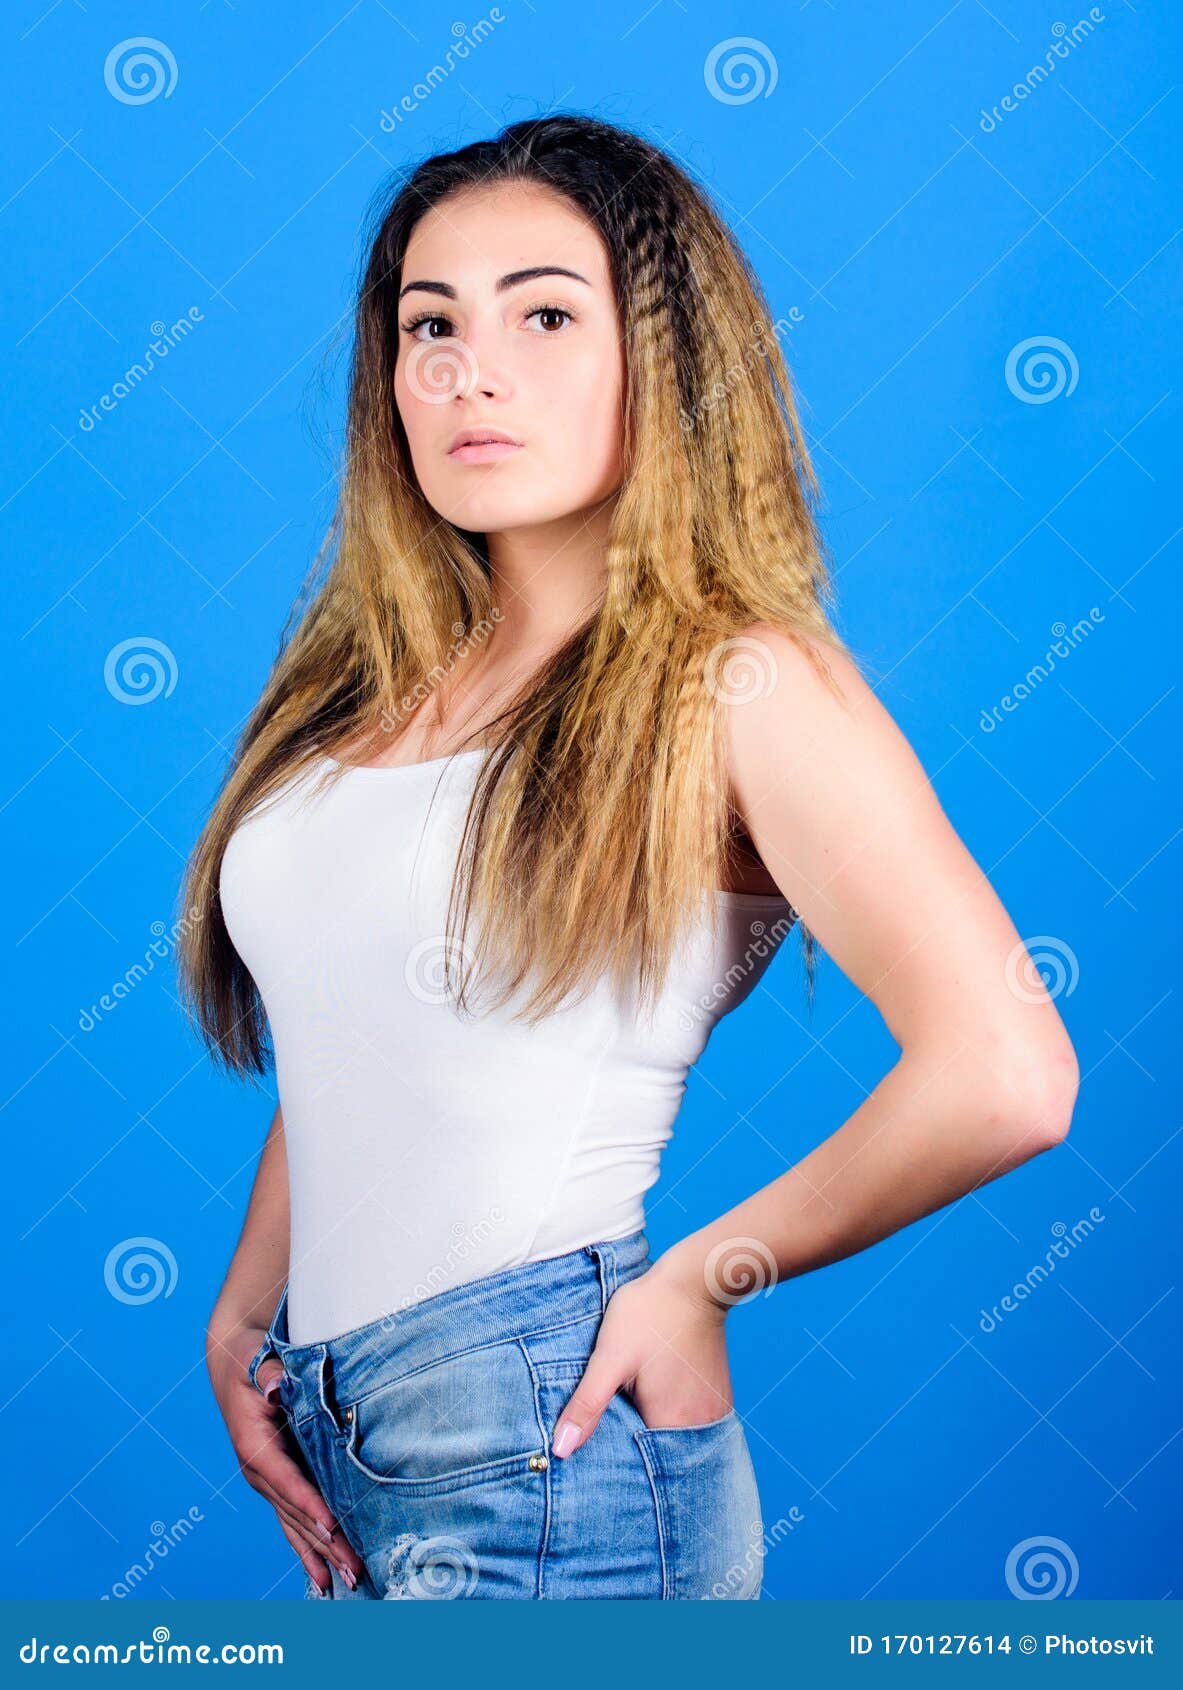 Styling Cosmetic Product. Crimped Hairstyles. Woman Stylish Hairstyle on  Blue Background Stock Photo - Image of beauty, background: 170127614